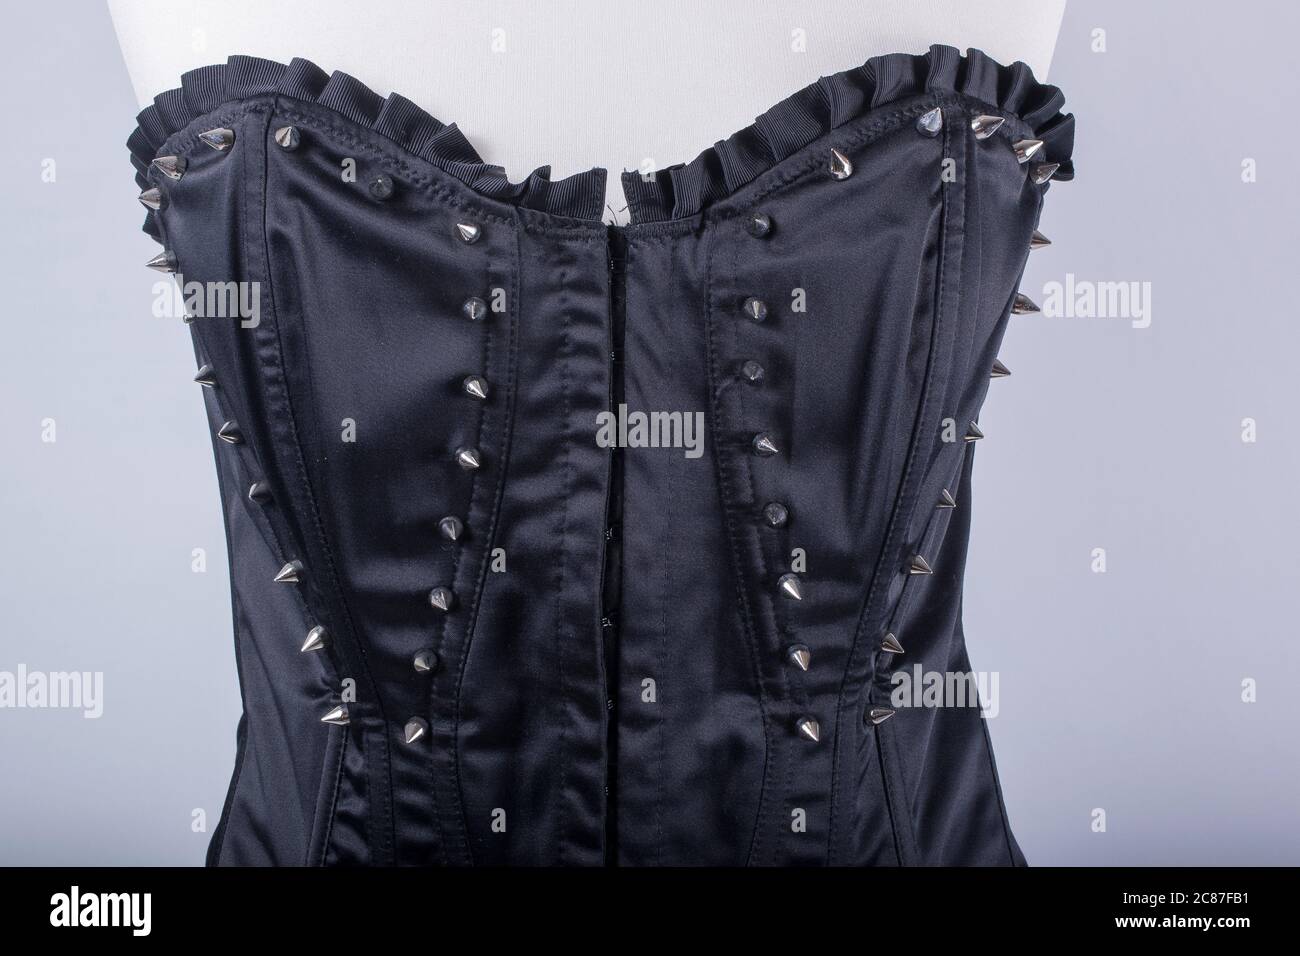 A Tailors Mannequin dressed in a Black Corset with Spikes Stock Photo